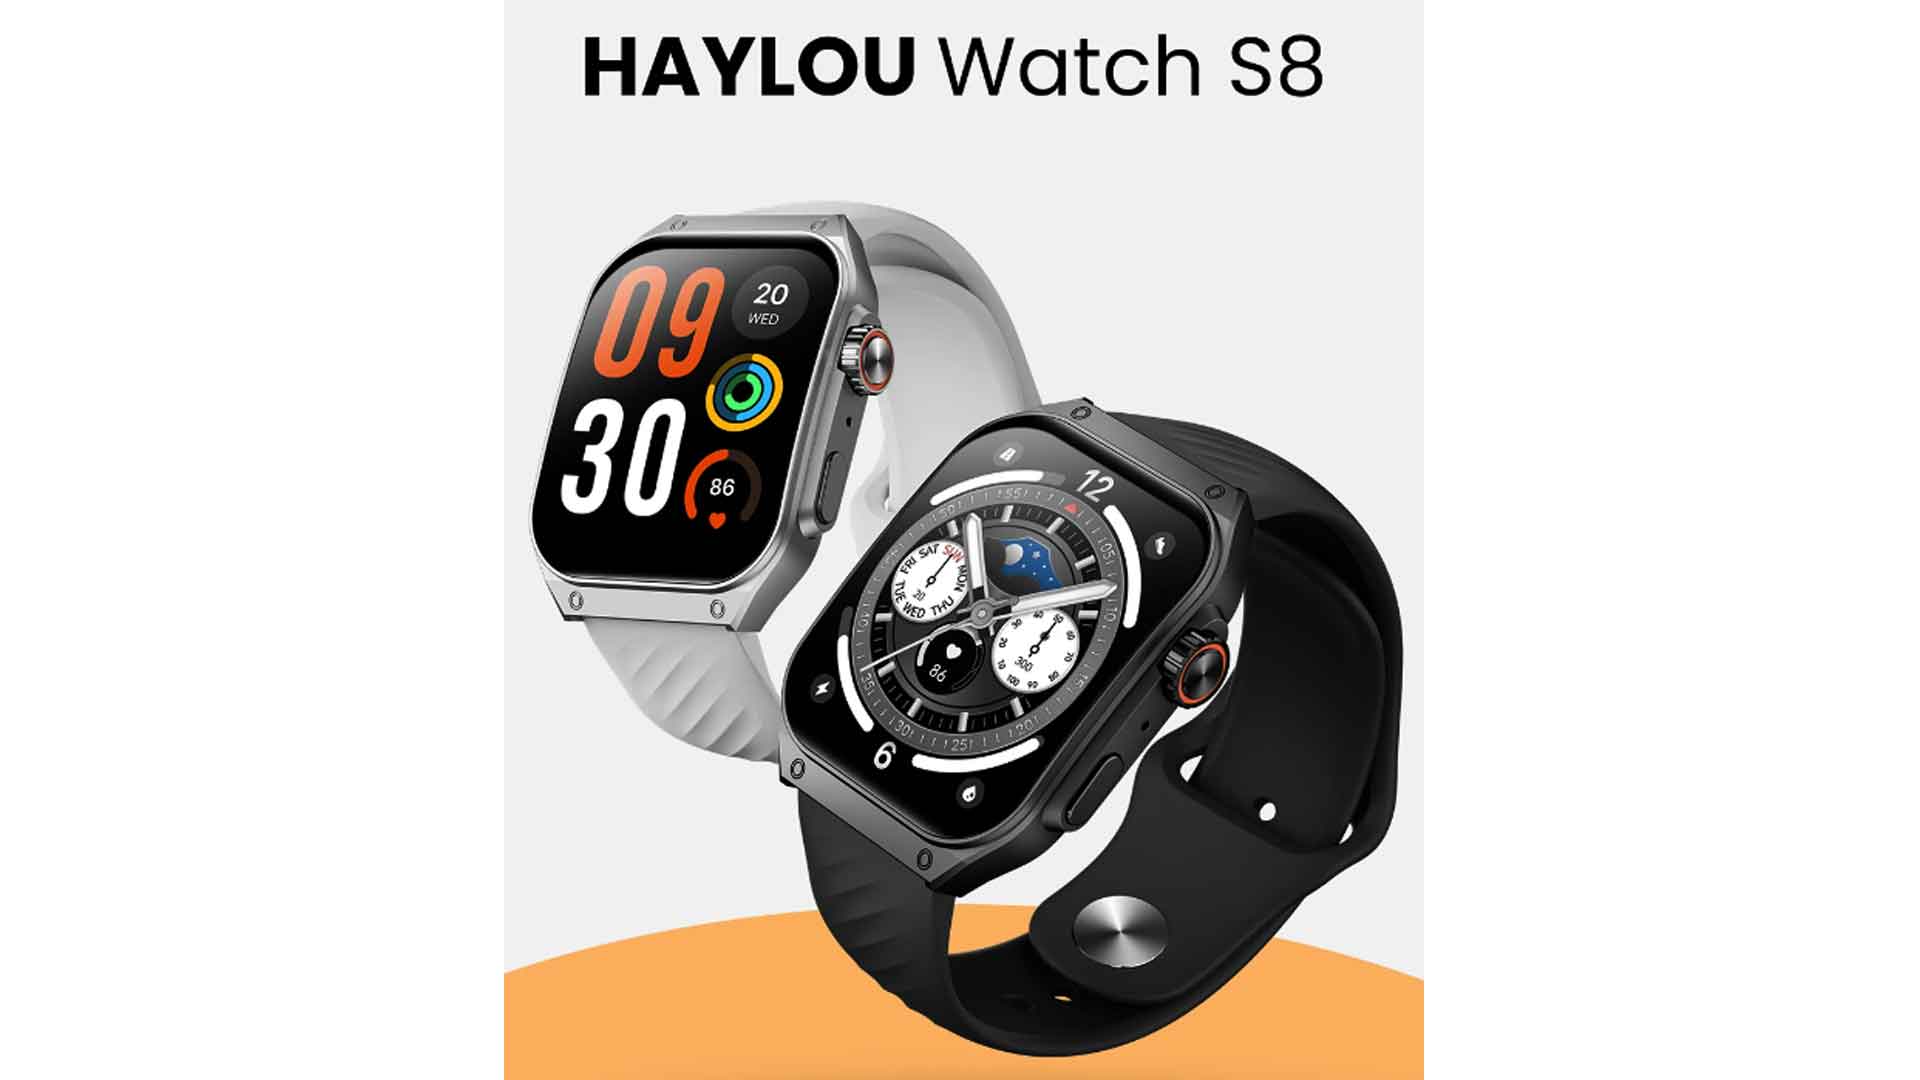 HAYLOU Watch S8 review, HAYLOU Watch S8 features, HAYLOU Watch S8 specs, HAYLOU Watch S8 price, smartwatch, HAYLOU Watch S8 smartwatch, smart watch, Bluetooth calling smartwatch, best smartwatch